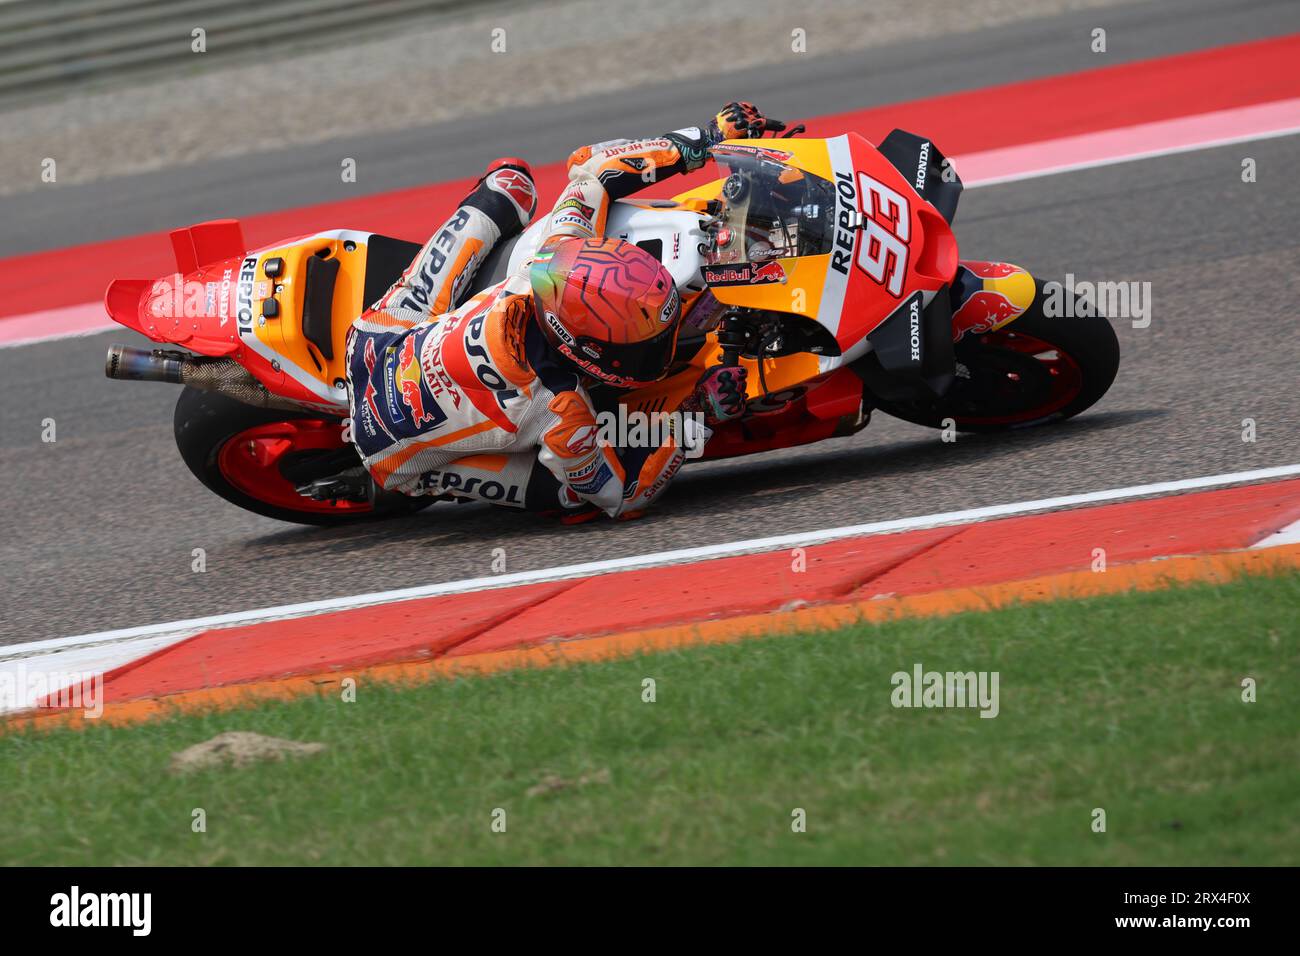 Motogp india hi-res stock photography and images - Page 3